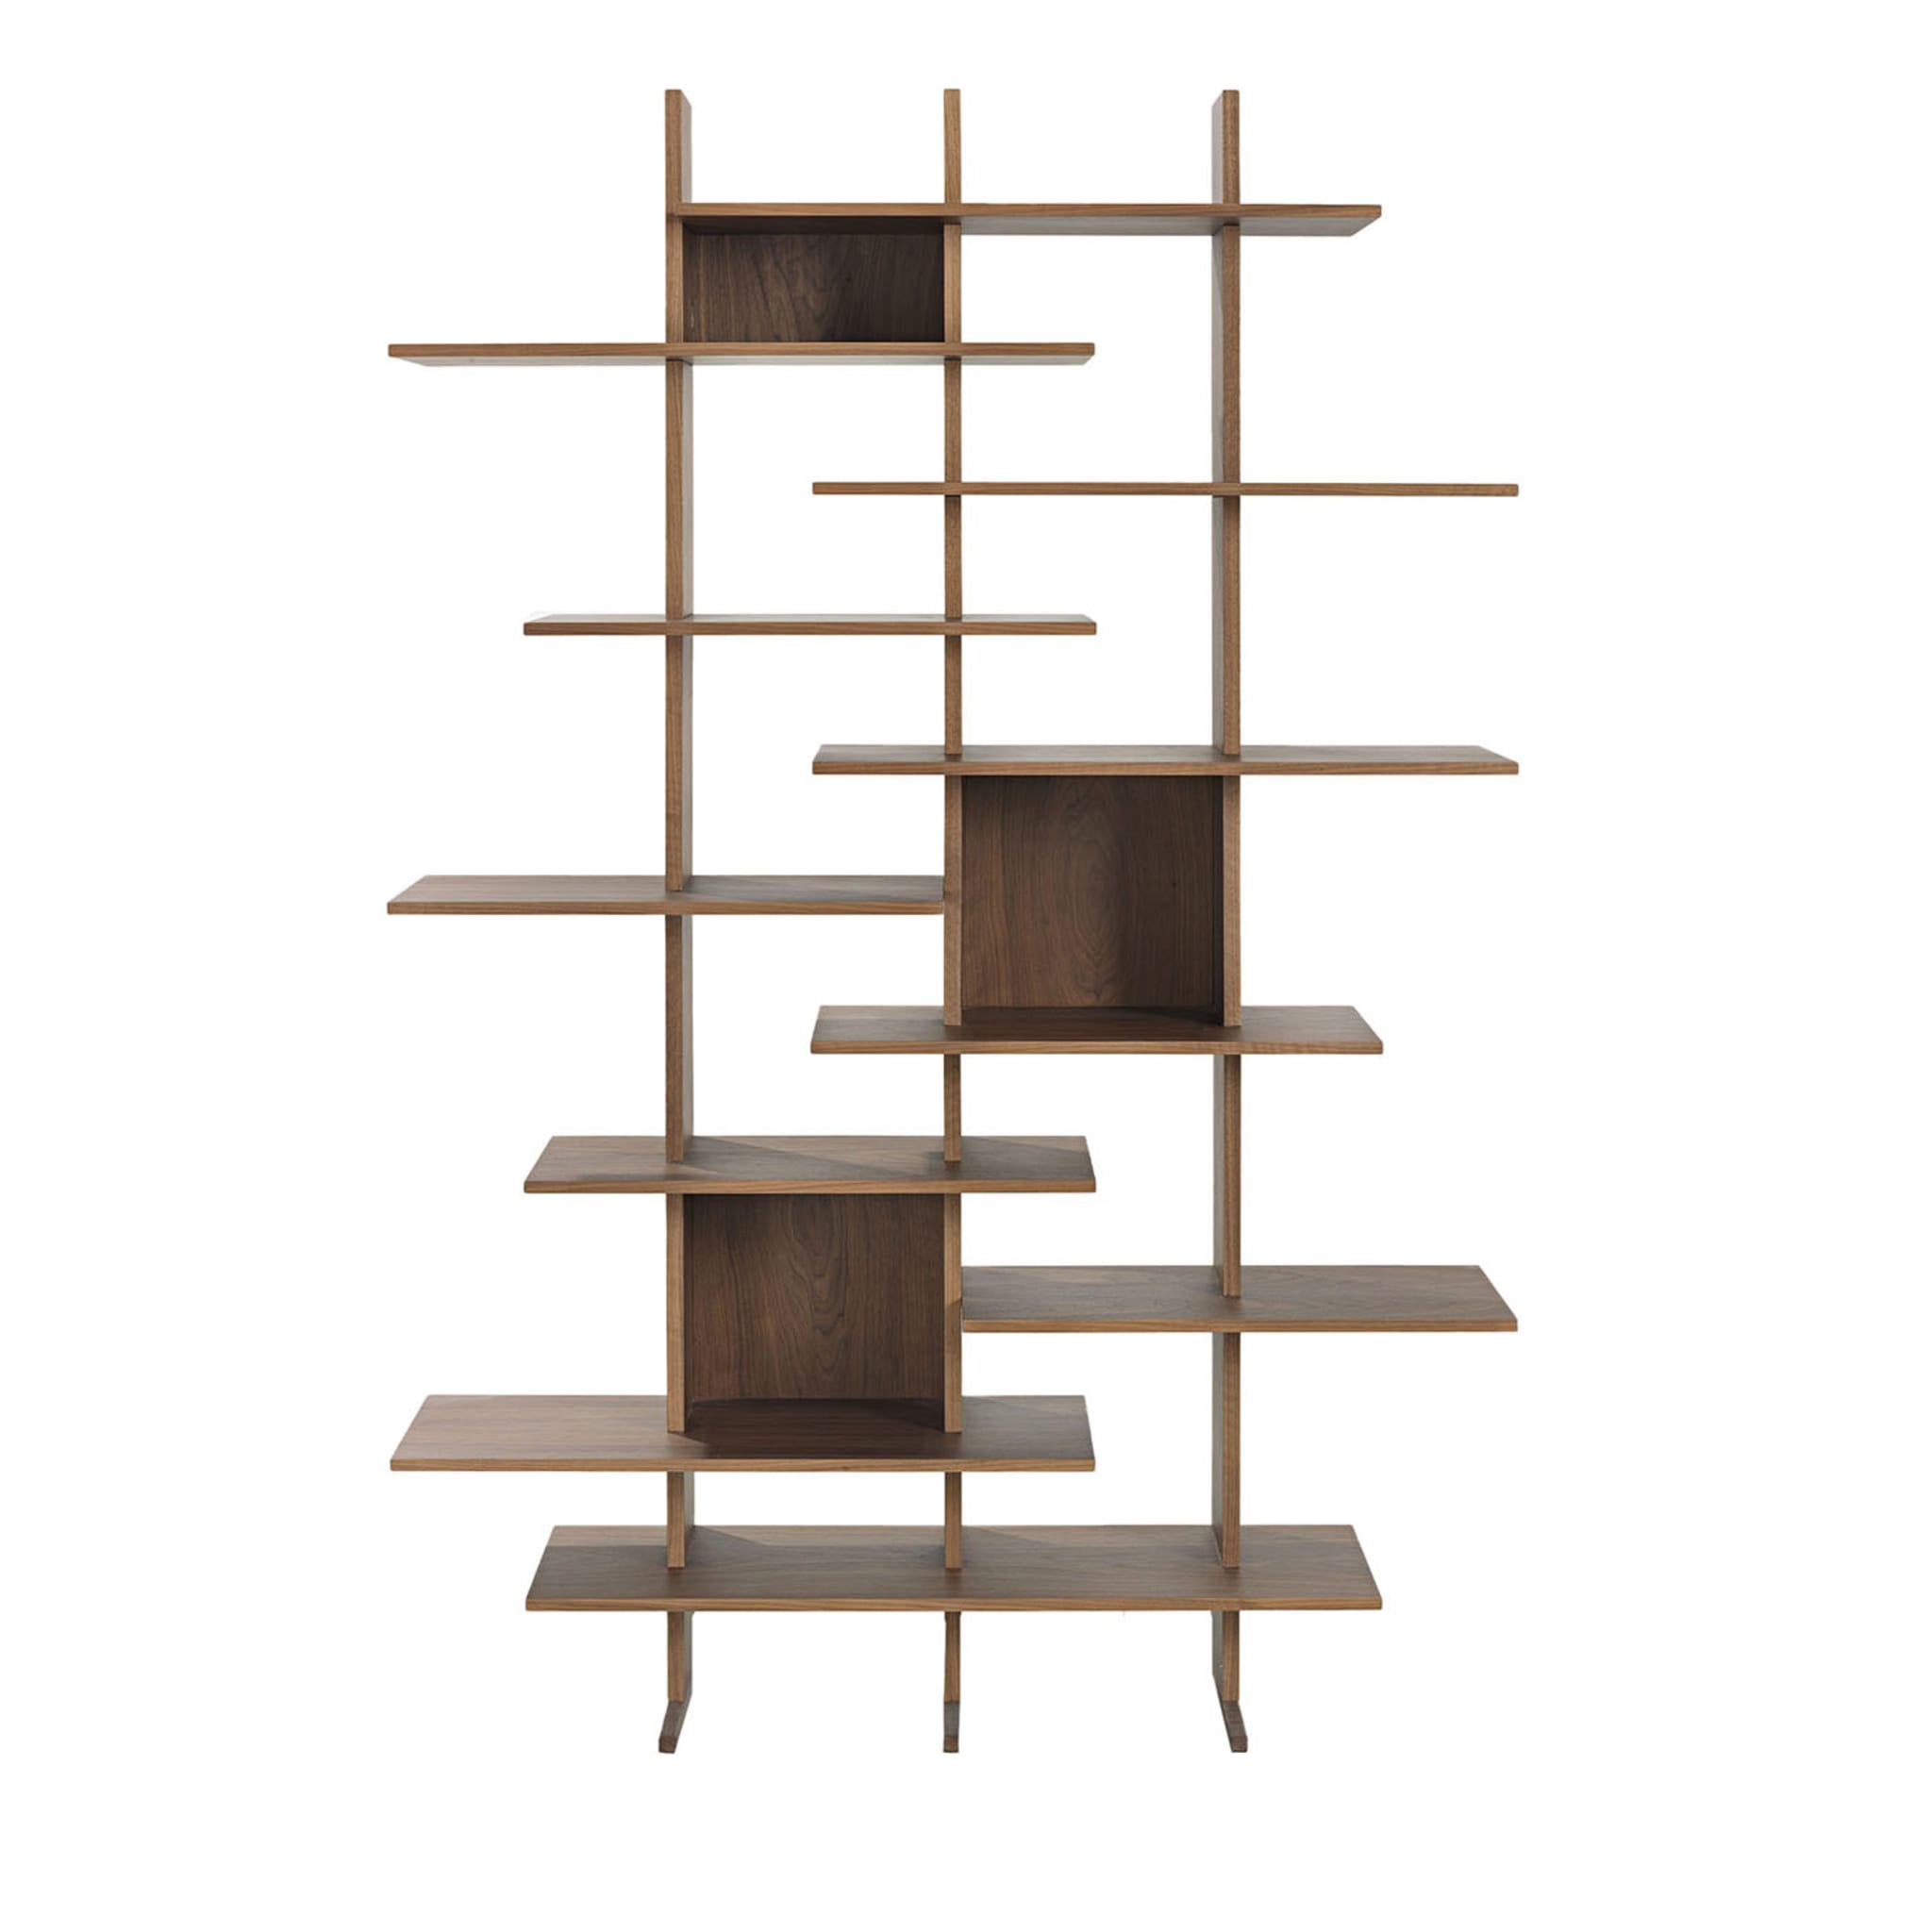 Elisabeth Bookcase #1 by Cesare Arosio and Beatrice Fanchini - Main view